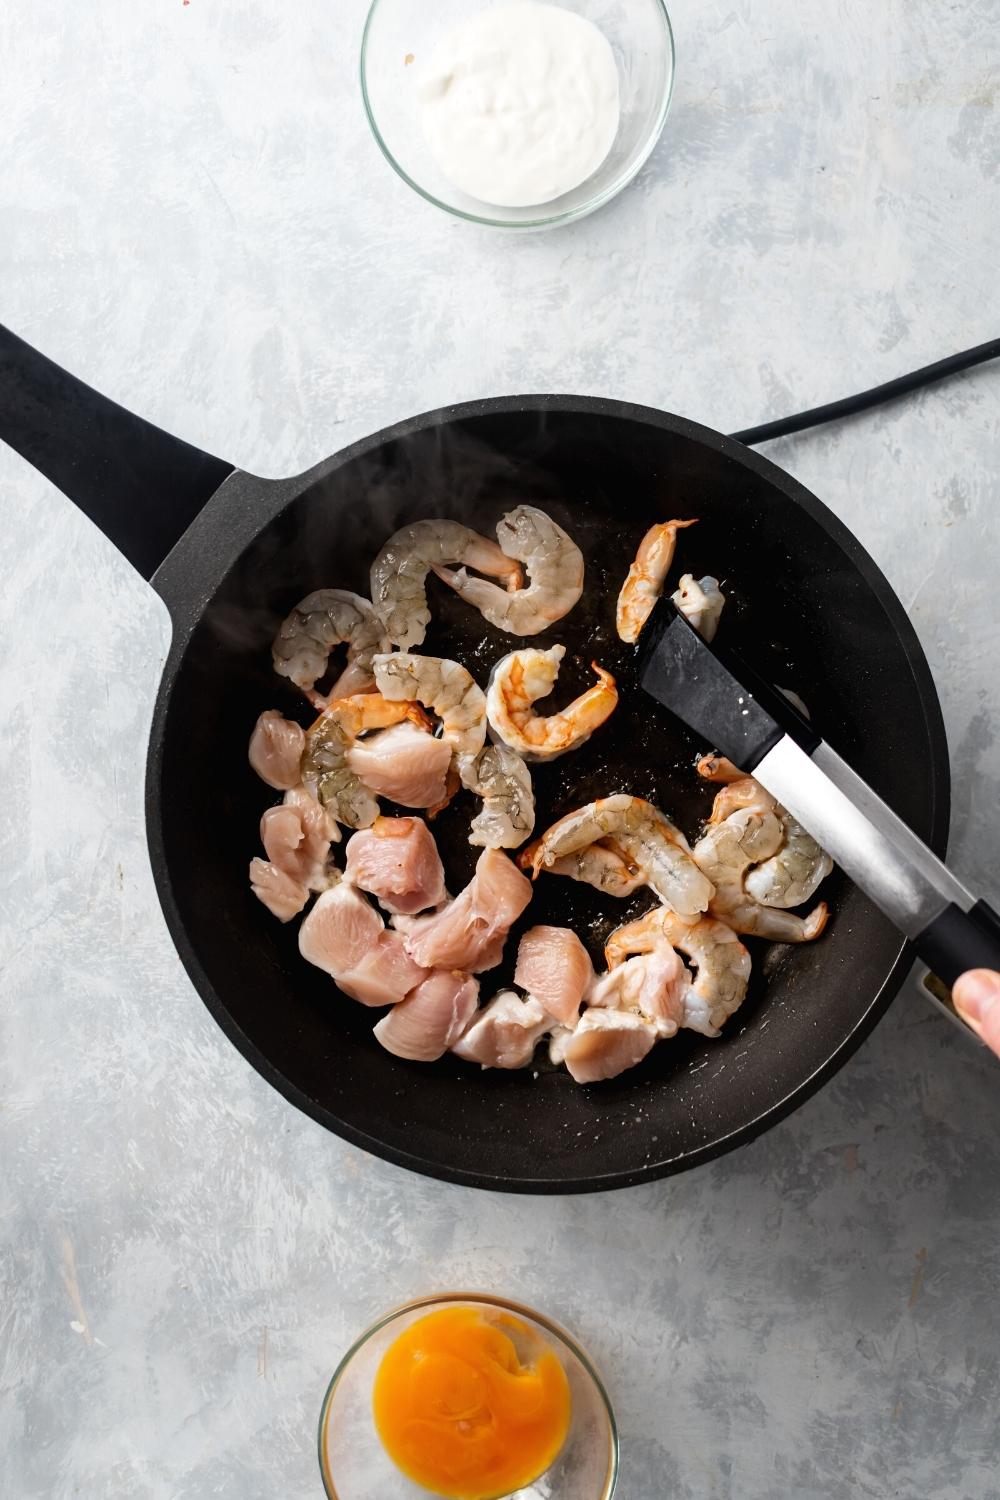 A skillet filled with chicken and shrimp. Behind it is above a girl going in front of it is a bowl of heavy cream.